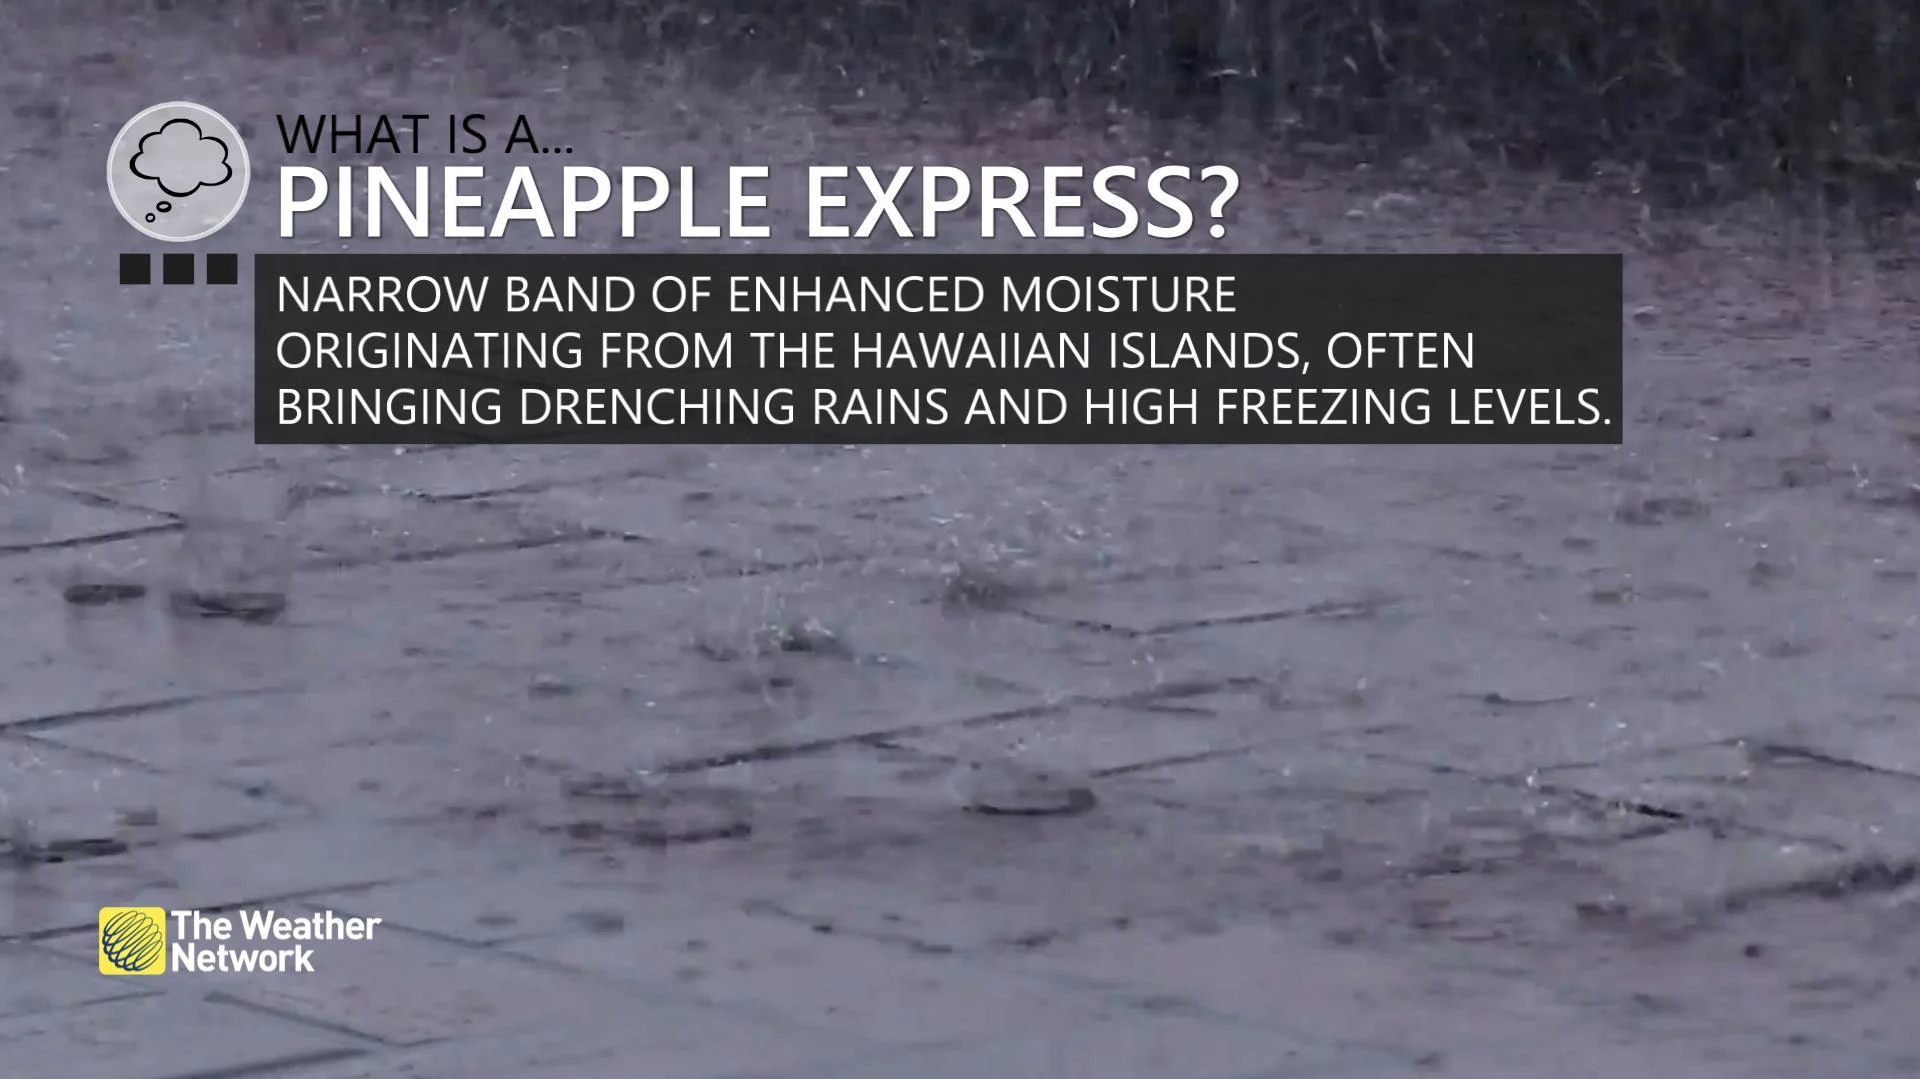 What is a pineapple express?